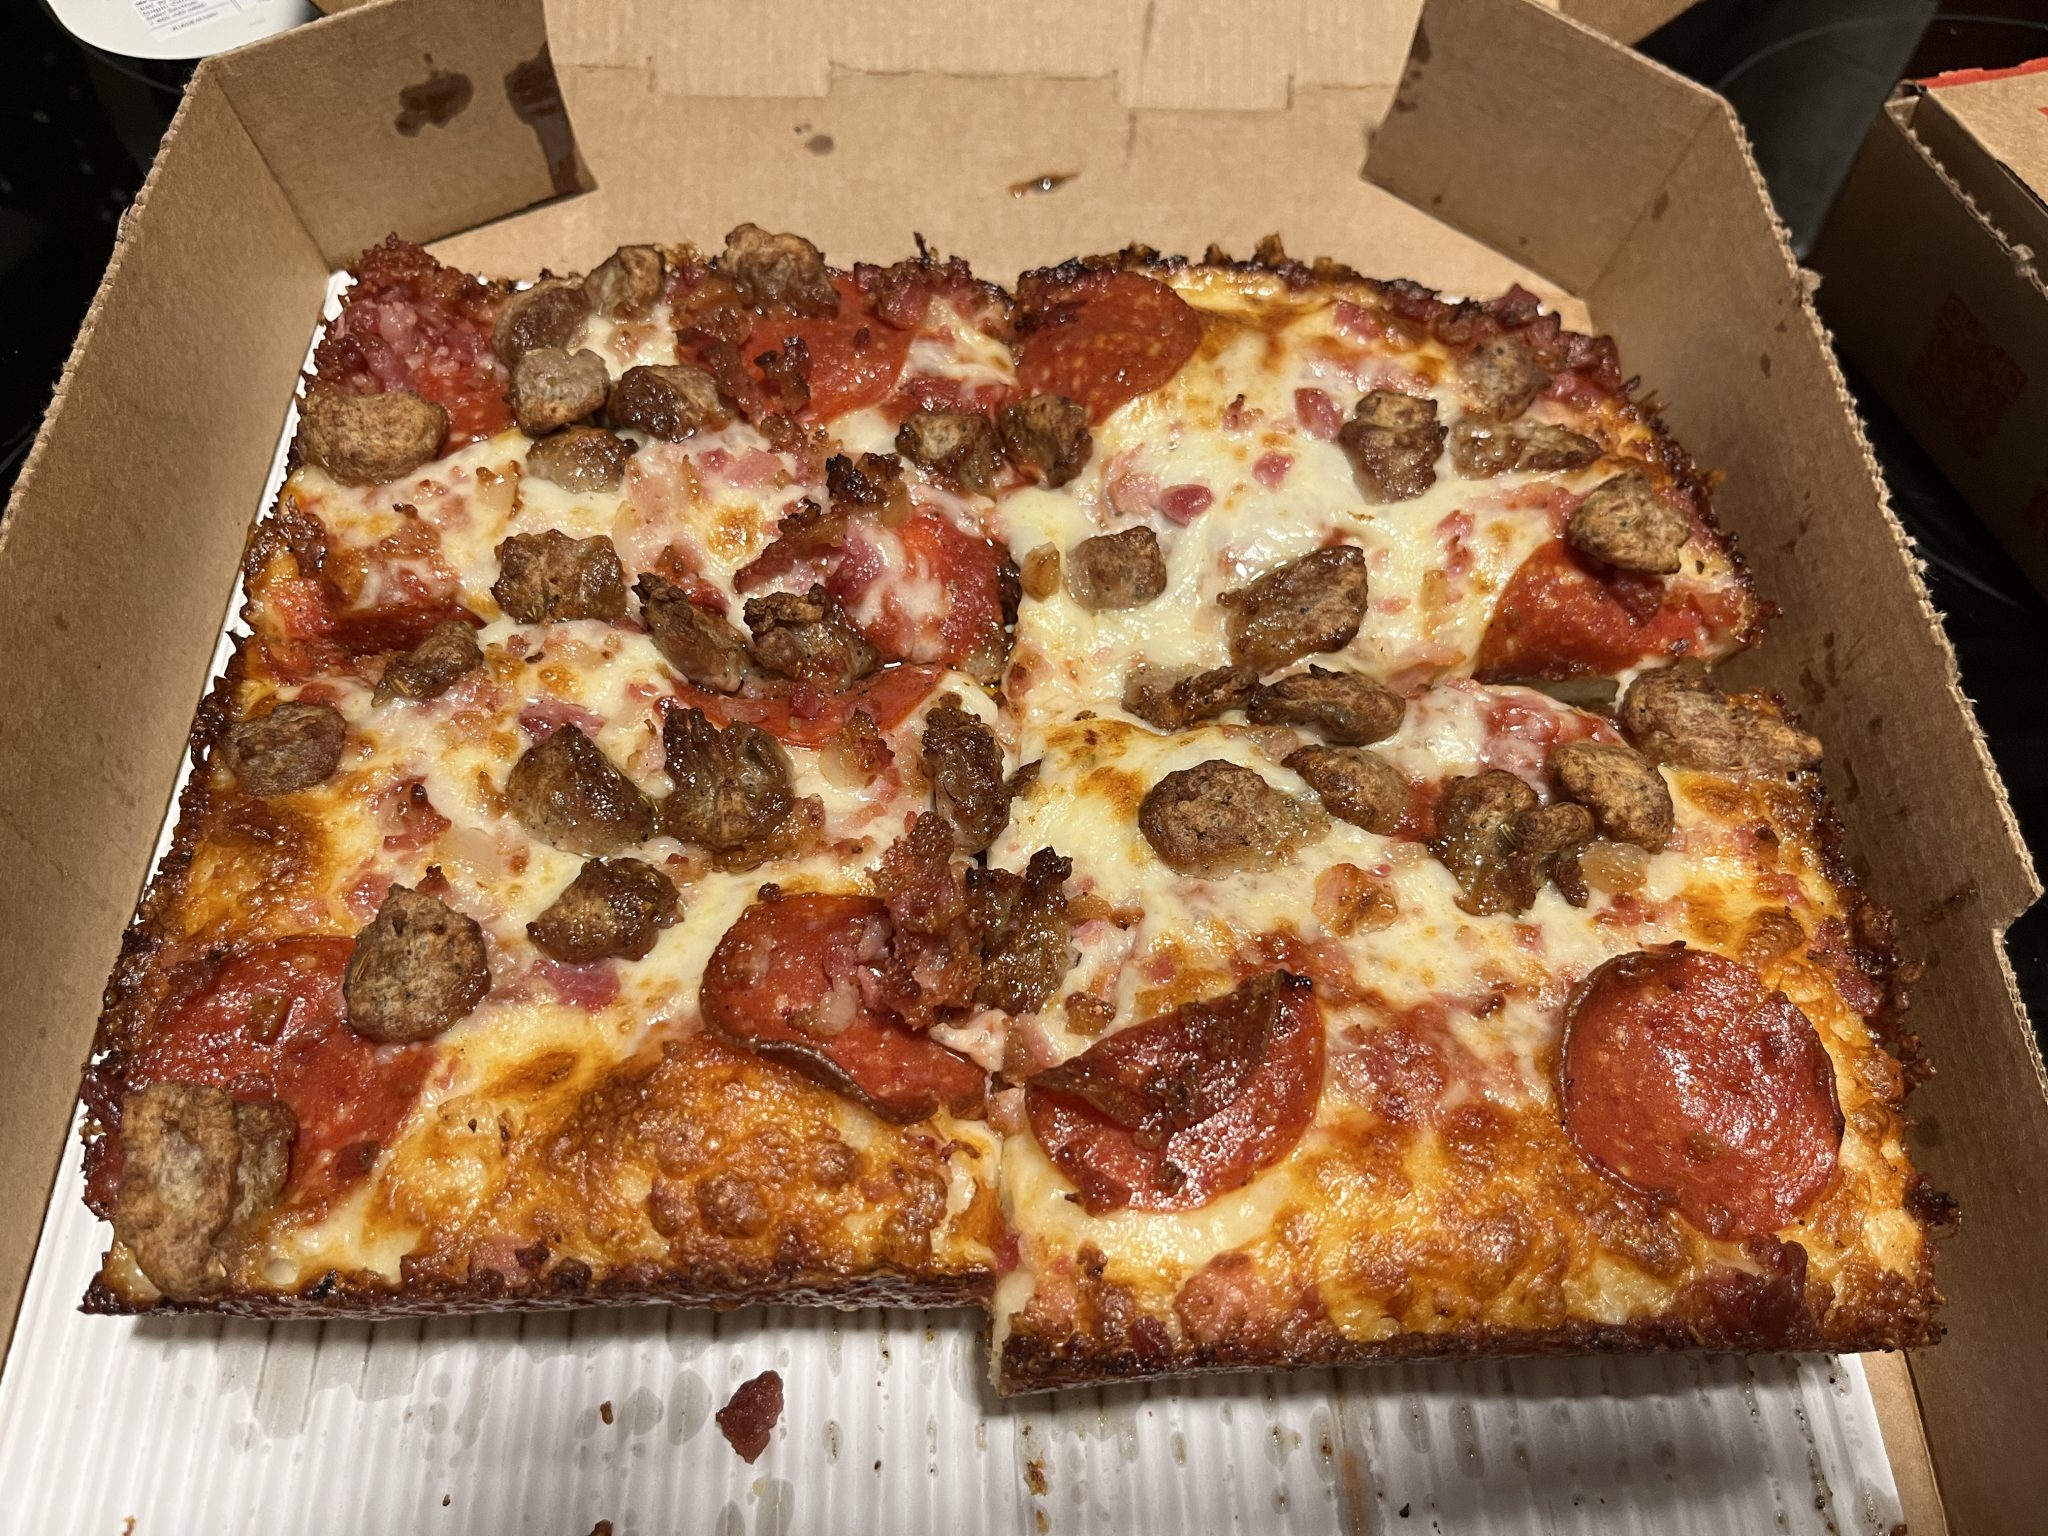 Pizza, square, thick crust, crispy and square on the corners, pepperoni, italian sausage, bacon.